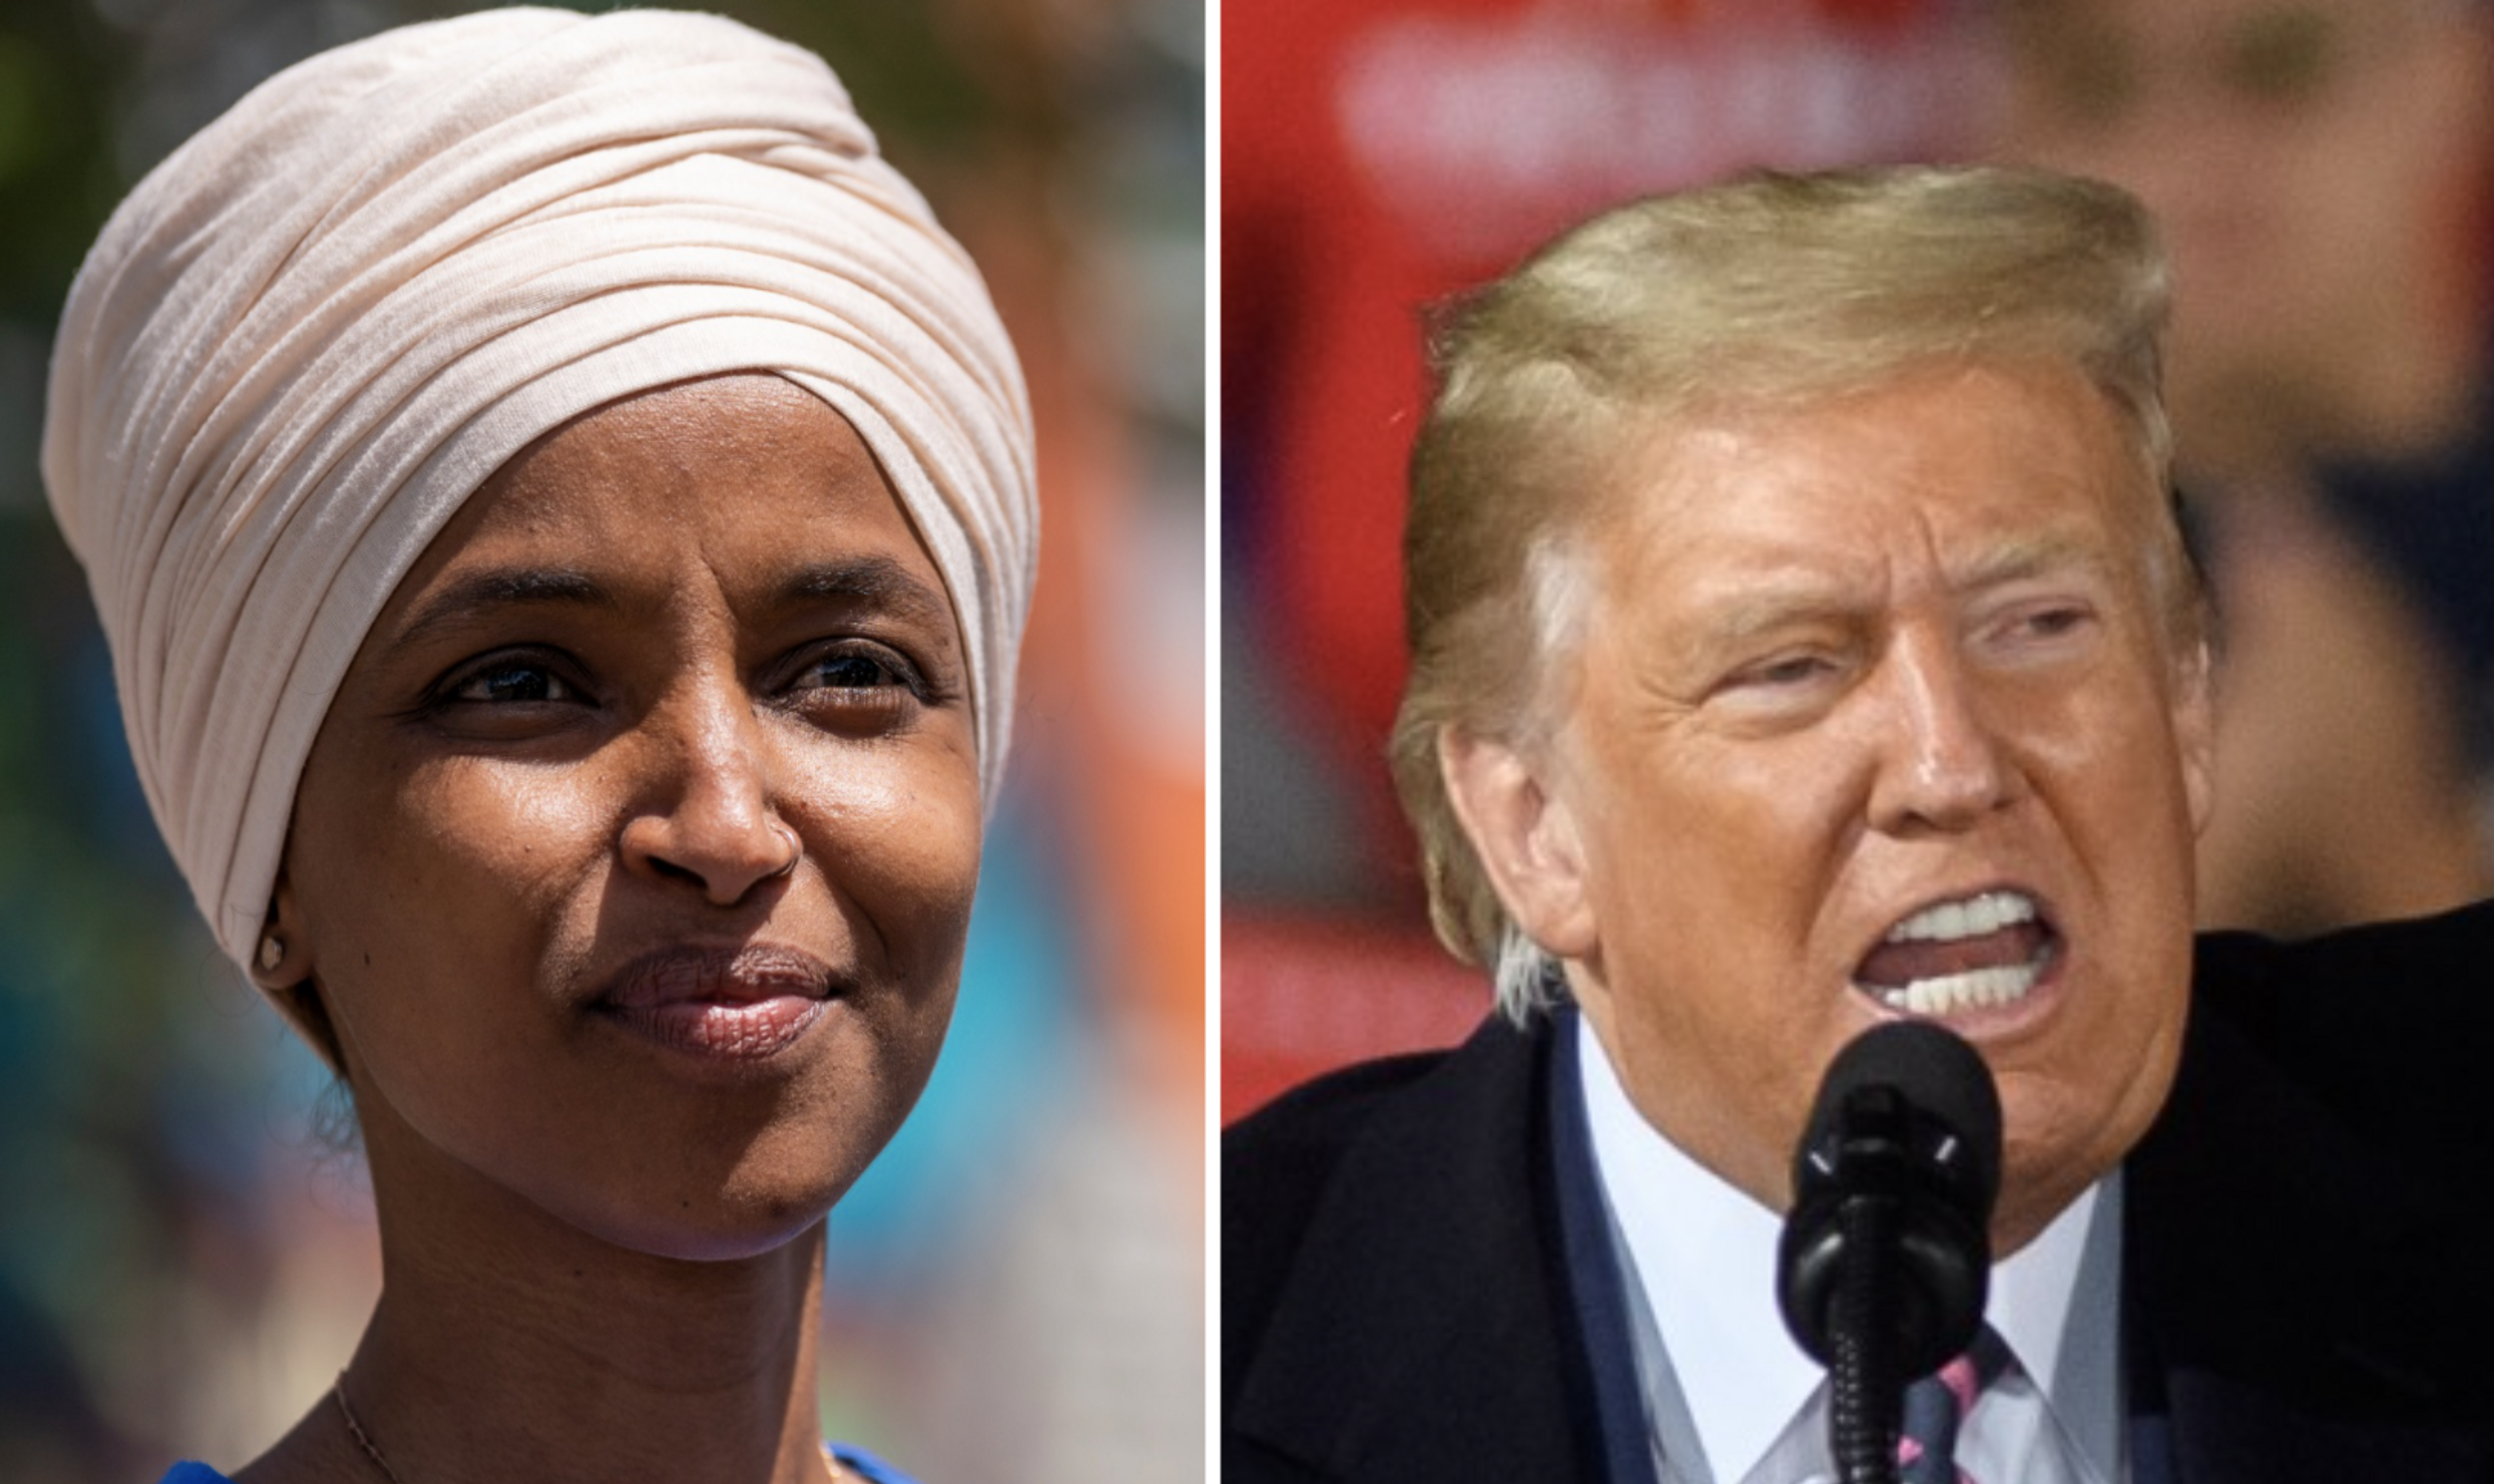 Ilhan Omar Perfectly Fired Back at Trump After He Tried to Come for Her at His Rally